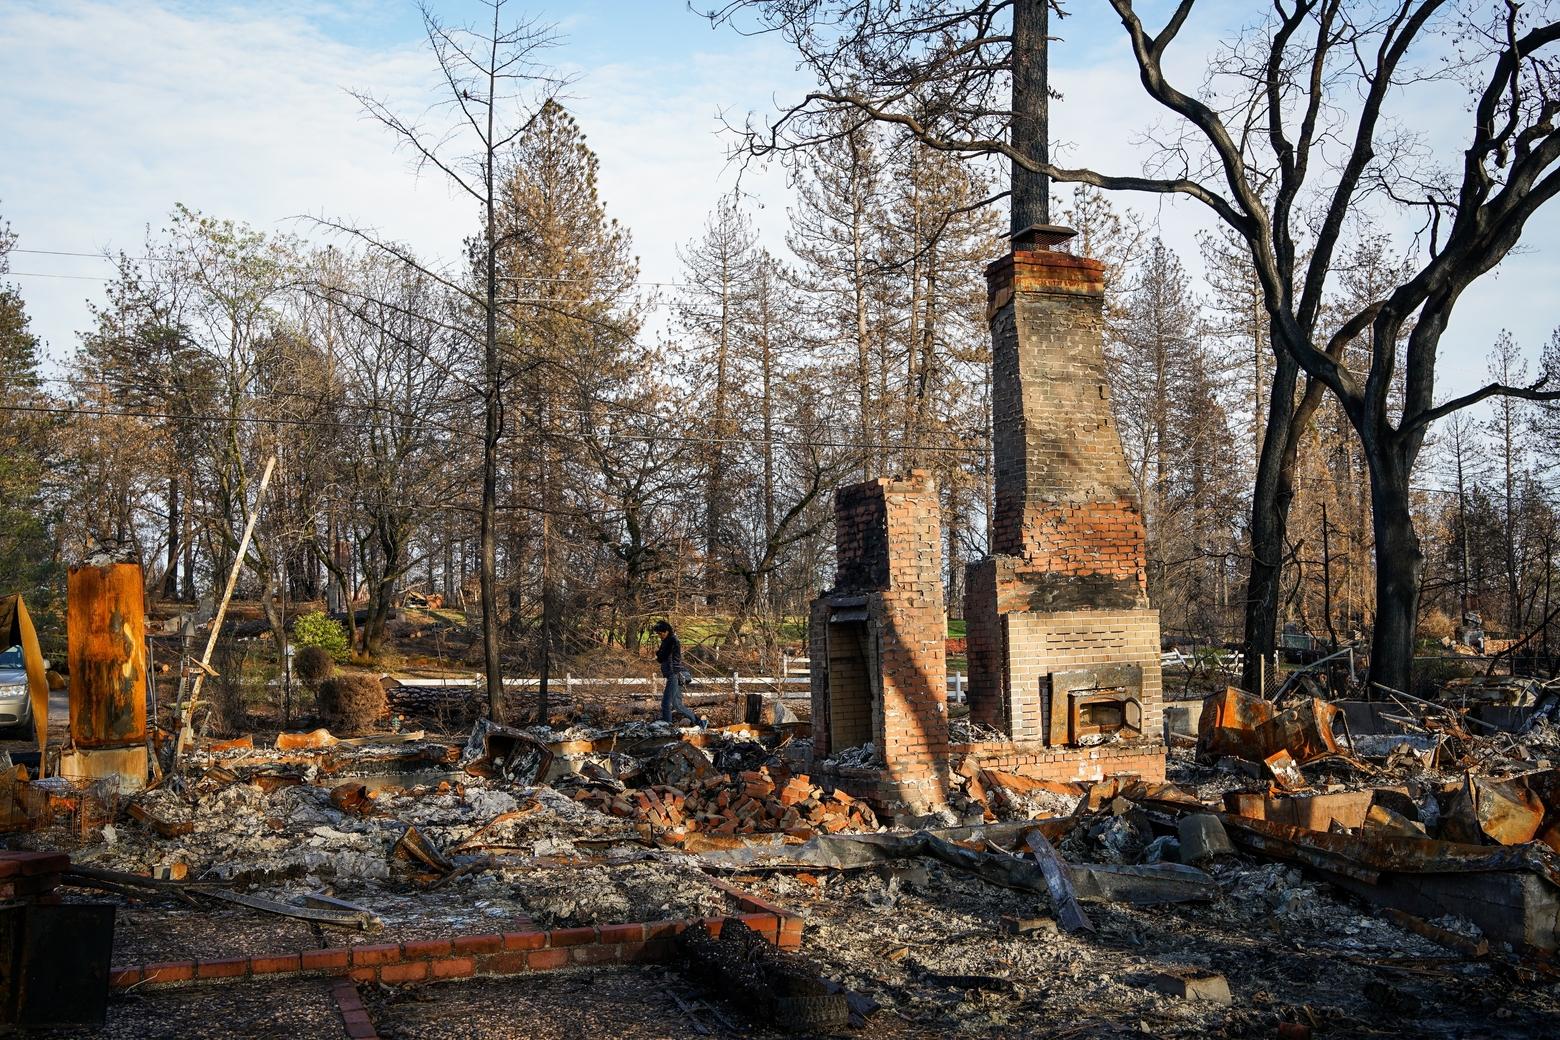 A tragic, solemn reminder from Paradise: the aftermath of the Camp Fire which swept through Paradise, California and other communities in 2018. With the economic toll pegged at $16.65 billion (with a b), it was called "the most expensive natural disaster in the world during that year in terms of insured losses."  At least 18,000 structures were lost in the Camp Fire and 85 people died, many of whom were overwhelmed by the swift advance of flames driven by gale-force winds.  Photo by M Yerman/ Shutterstock ID: 1517724701